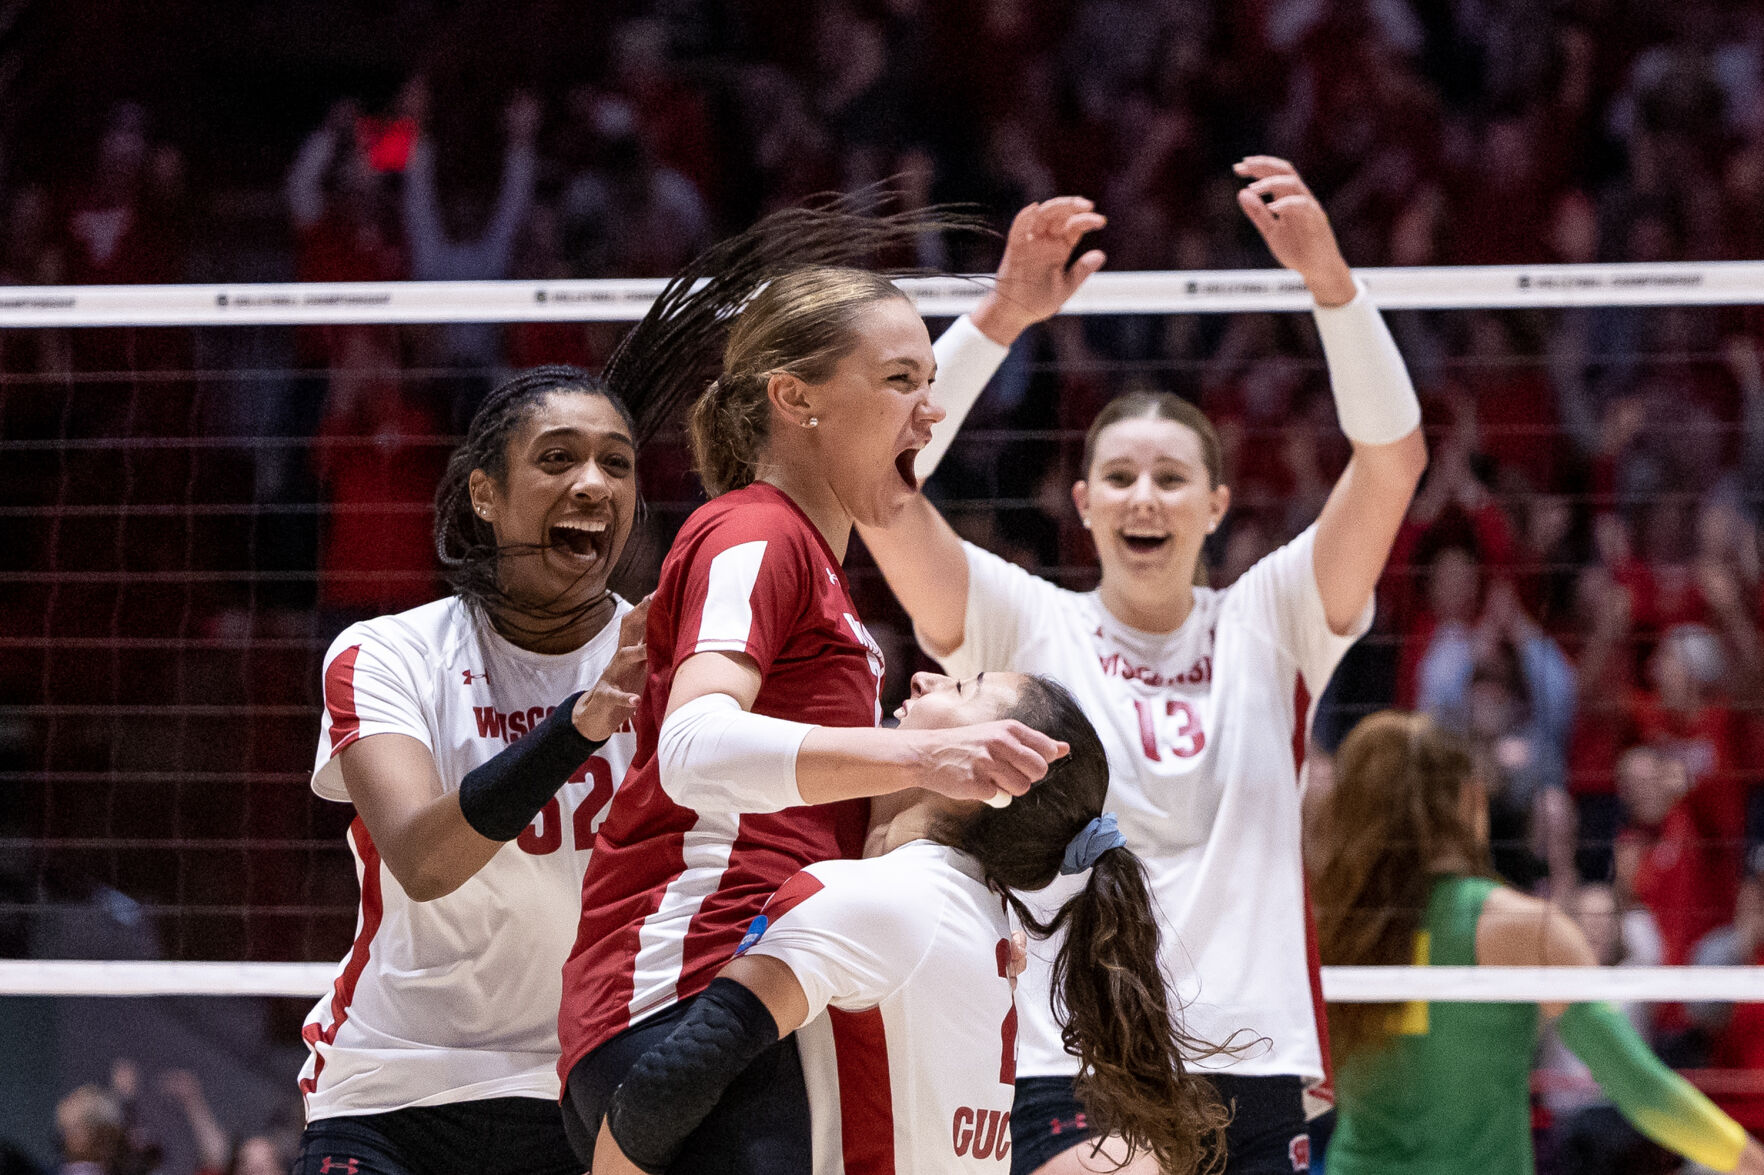 Here's a look at high school volleyball matches to watch, rankings